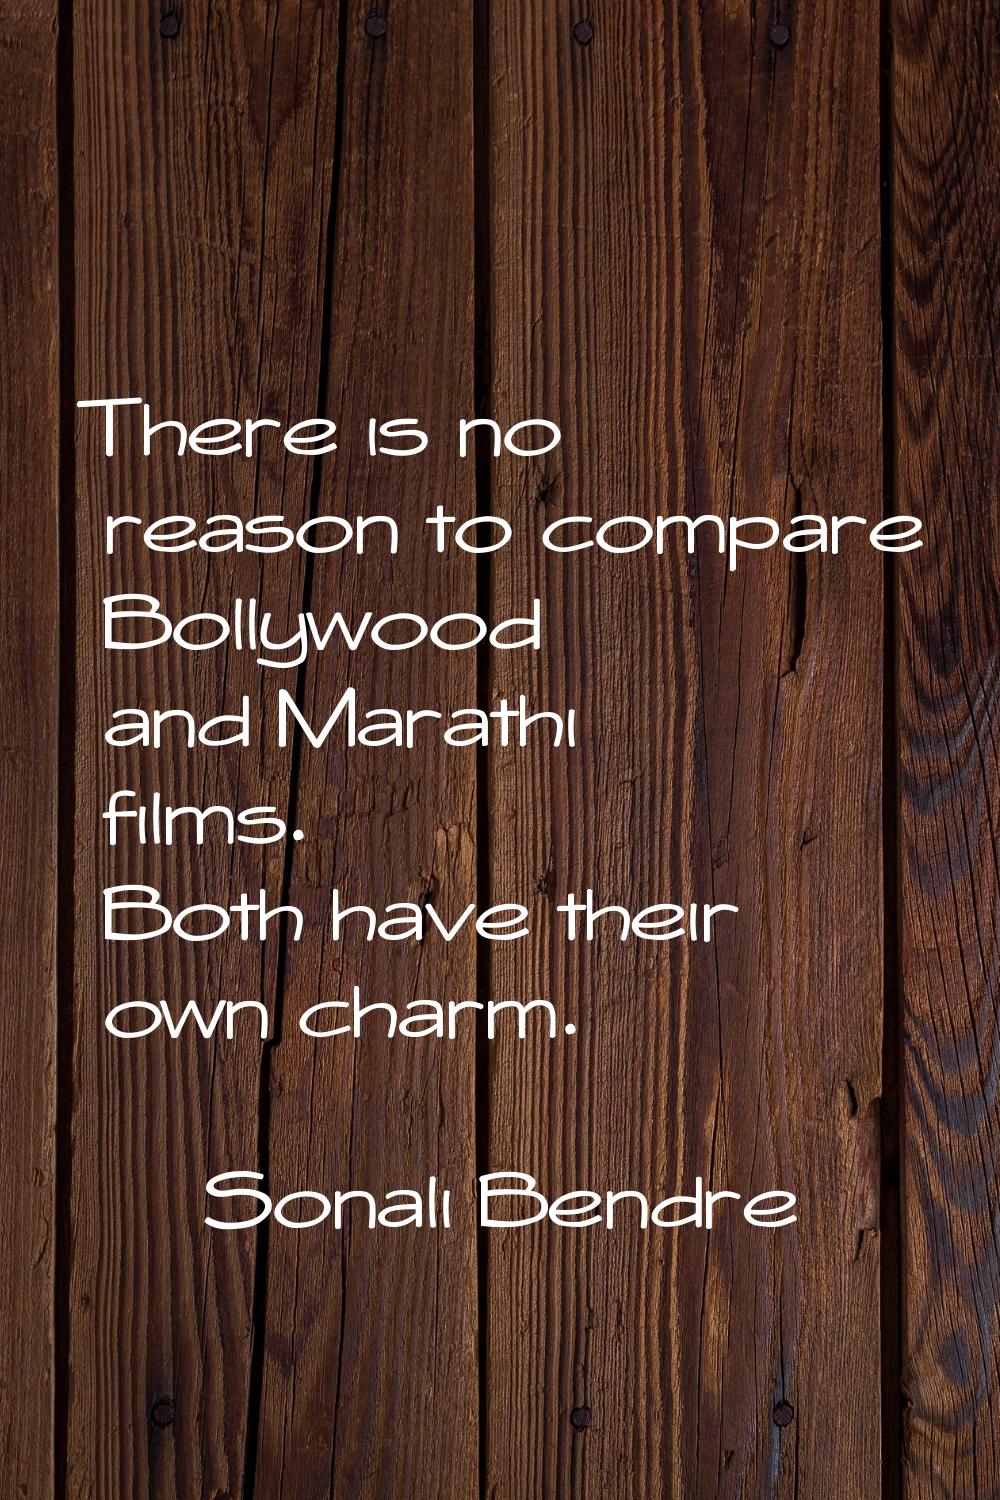 There is no reason to compare Bollywood and Marathi films. Both have their own charm.